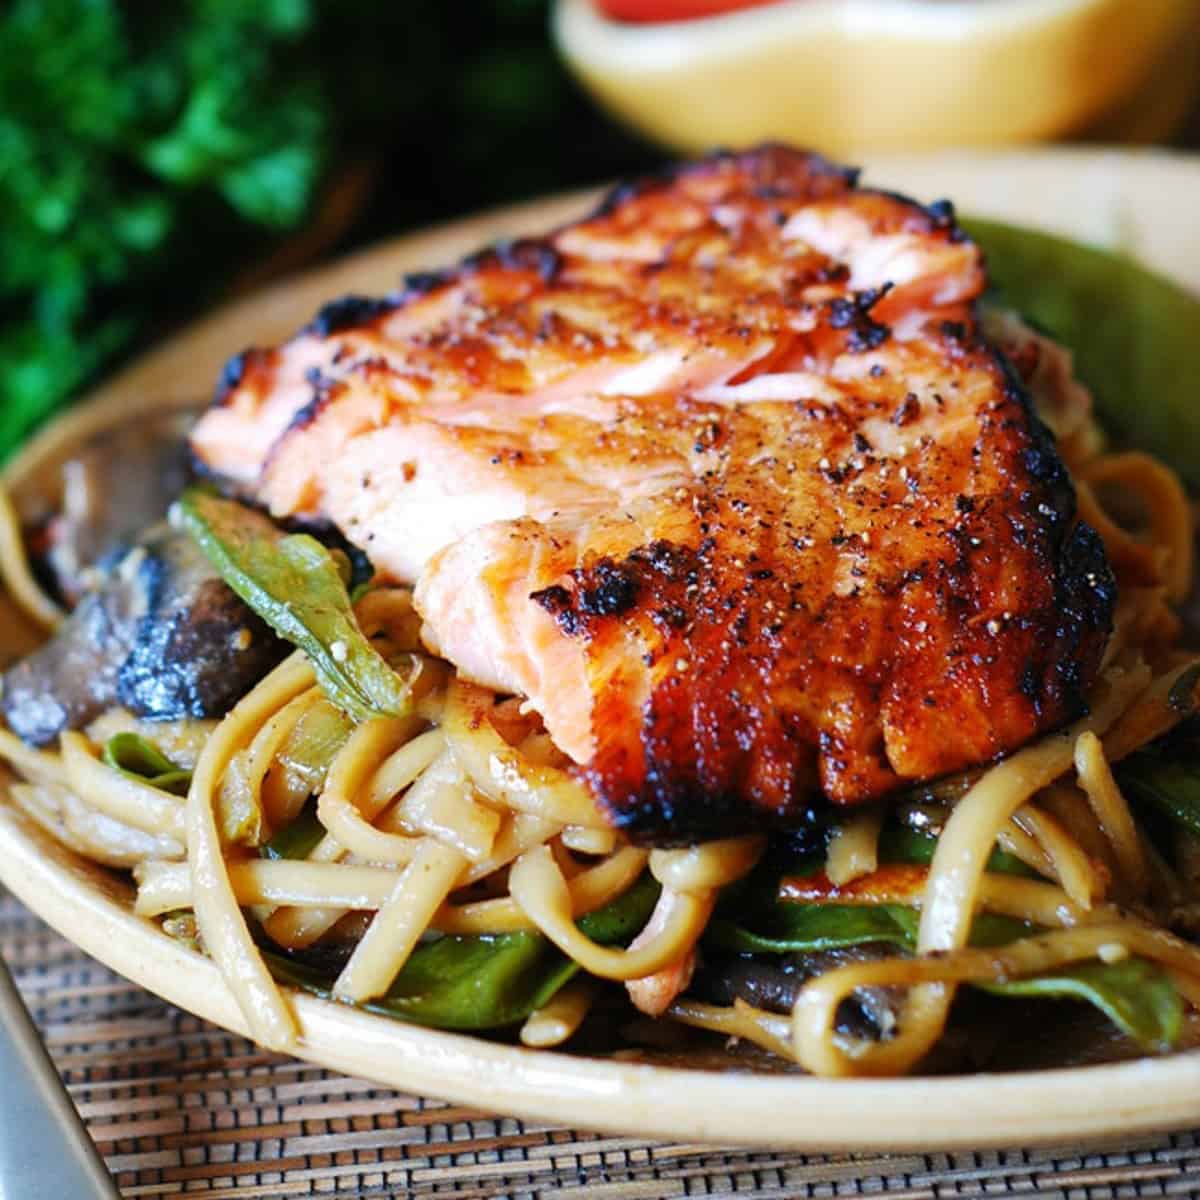 Asian salmon with noodles, mushrooms, and snow peas - on a plate.